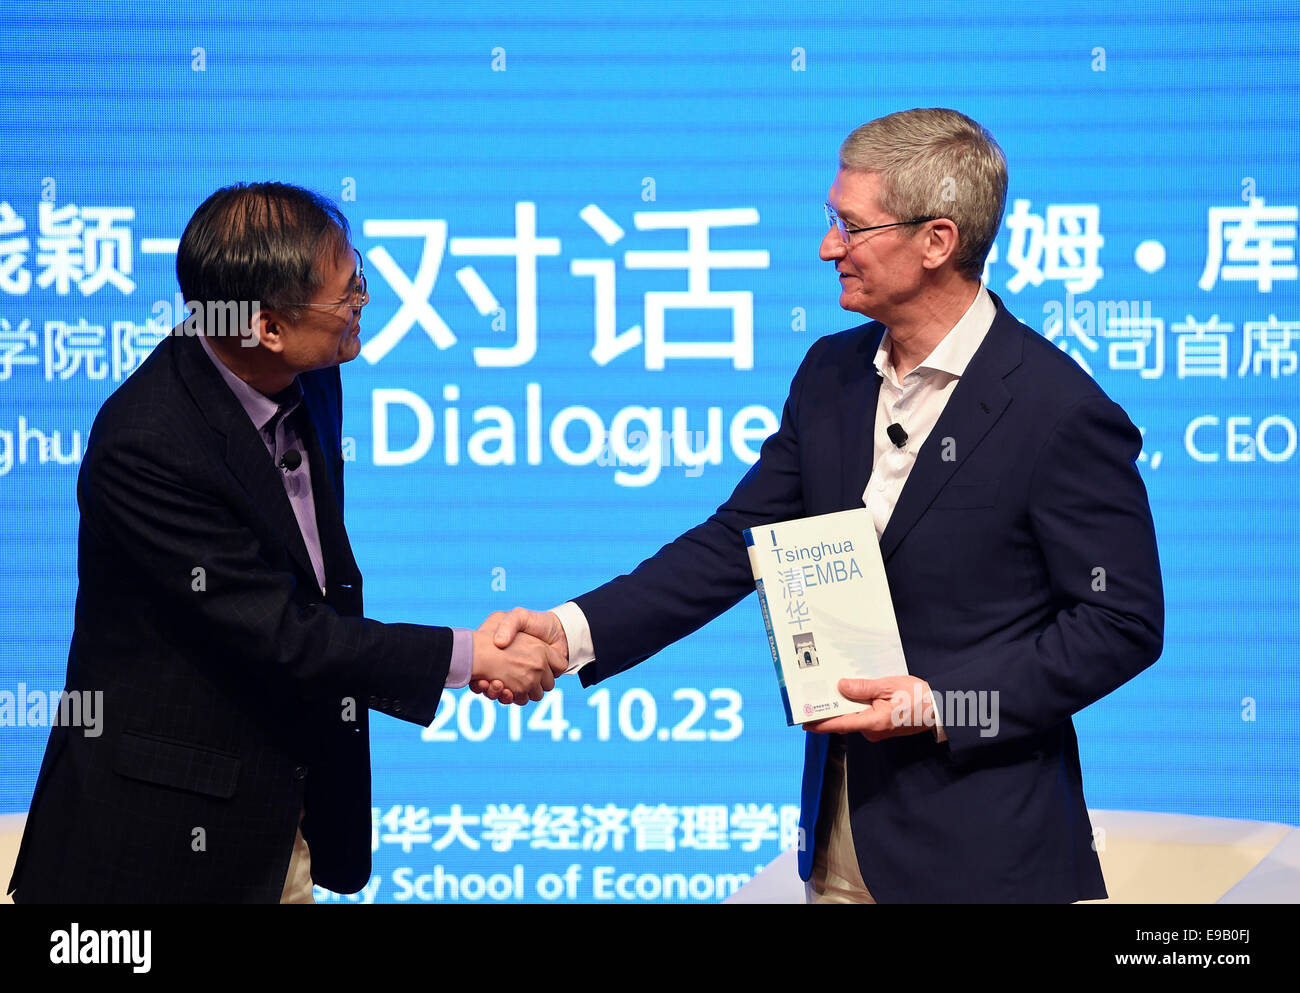 Beijing, China. 23rd Oct, 2014. Apple CEO Tim Cook (R) receives a souvenir from the Tsinghua University School of Economics and Management (SEM) during an exchange activity in Tsinghua, Beijing, China, Oct. 23, 2014. Credit:  Qi Heng/Xinhua/Alamy Live News Stock Photo